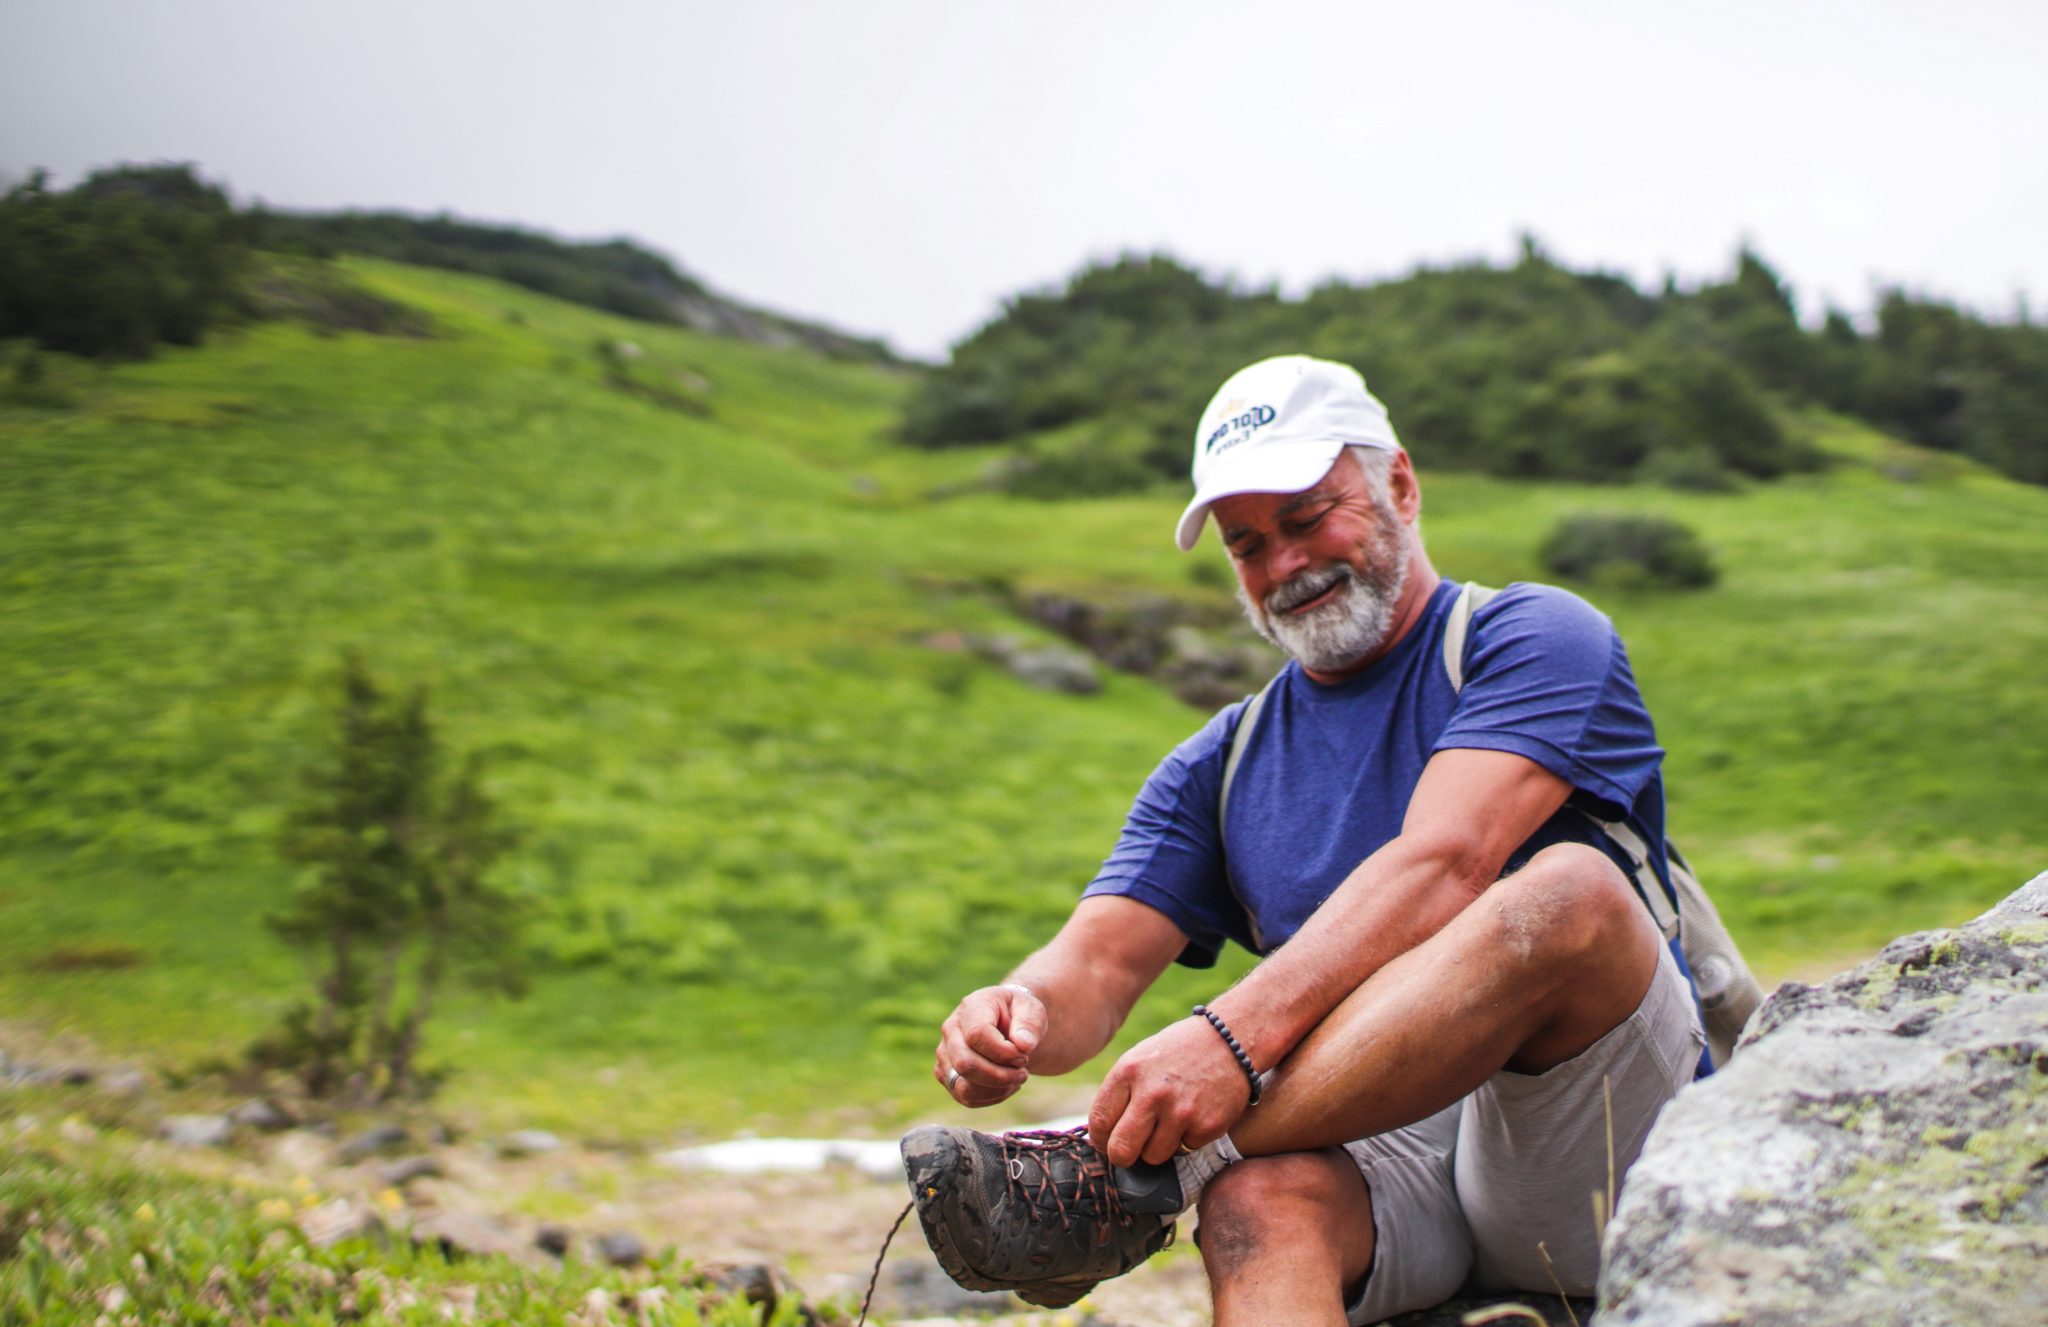 A middle aged man pauses to tie his shoe on a hike in a hilly, green landscape